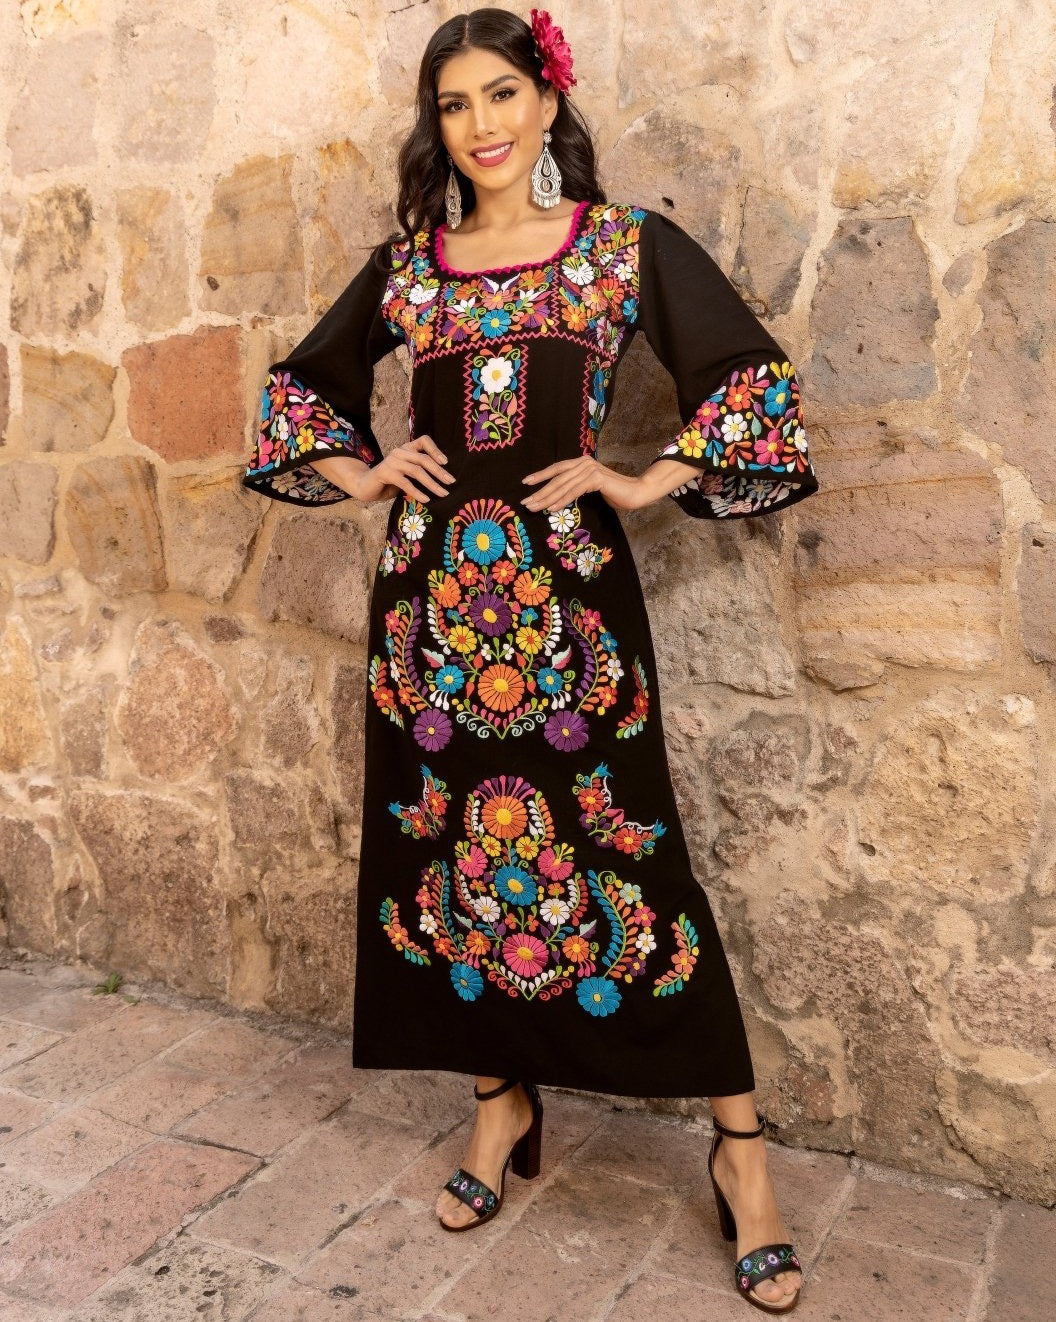 Floral Embroidered Traditional Mexican Dress in Black